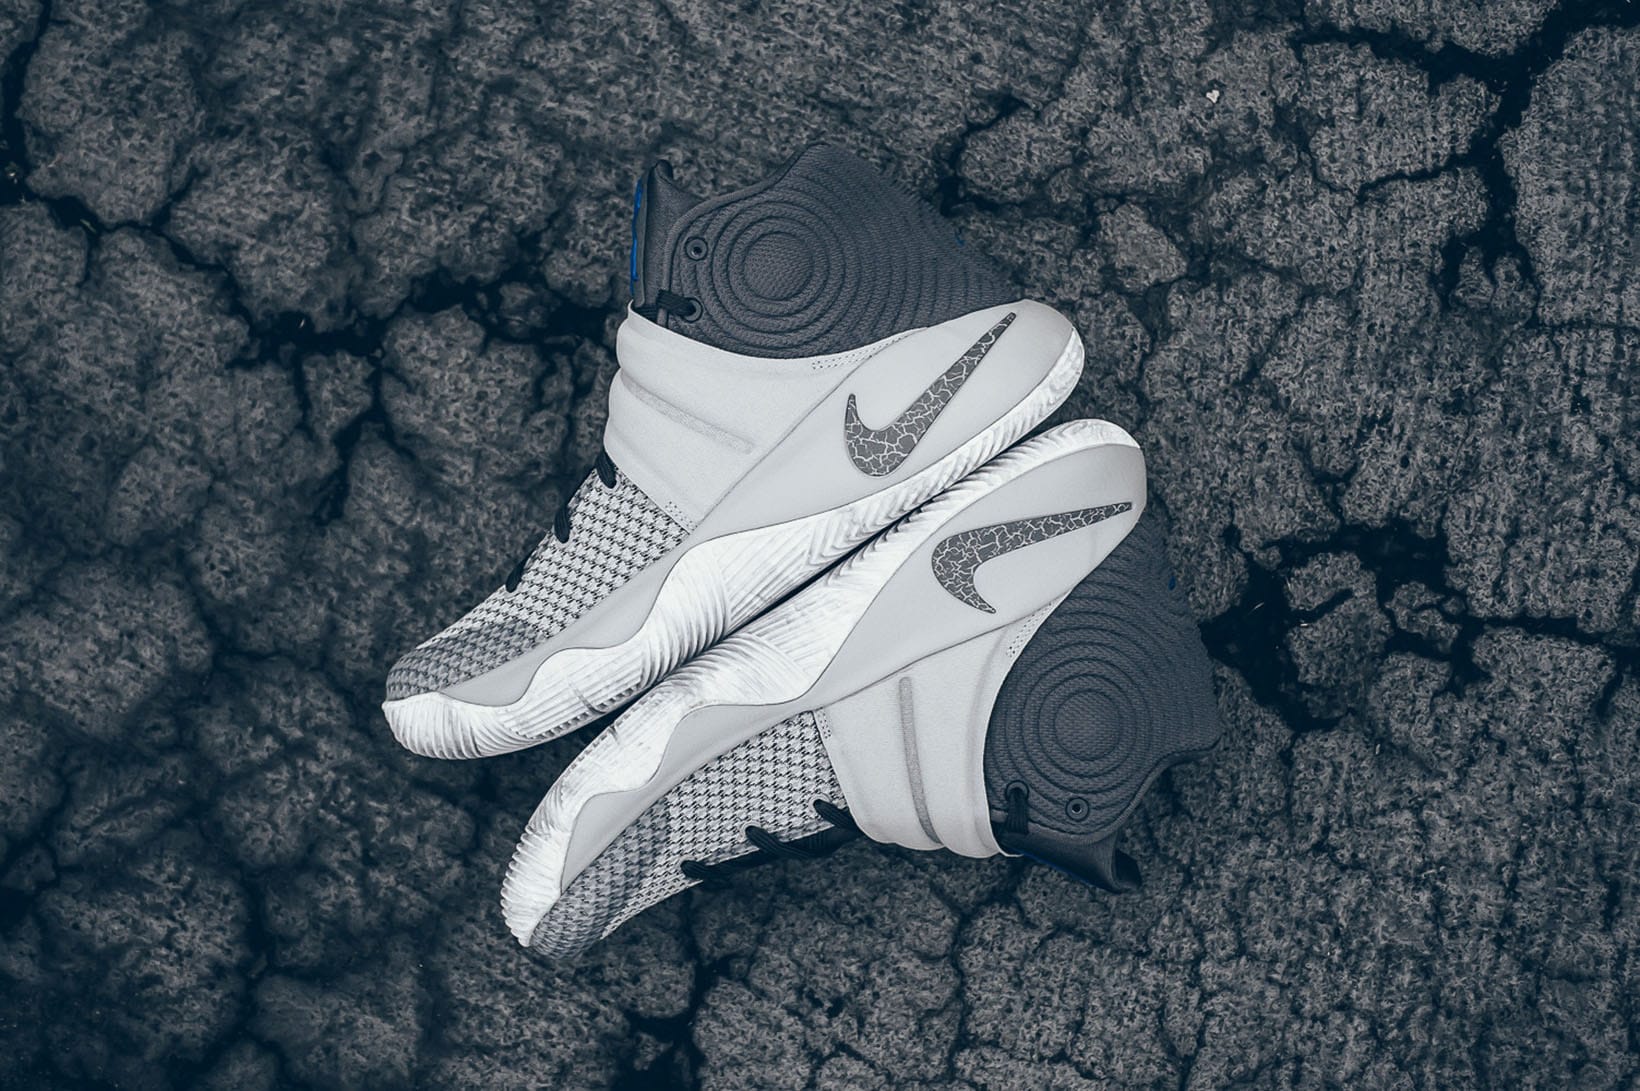 kyrie 2 shoes wolf grey